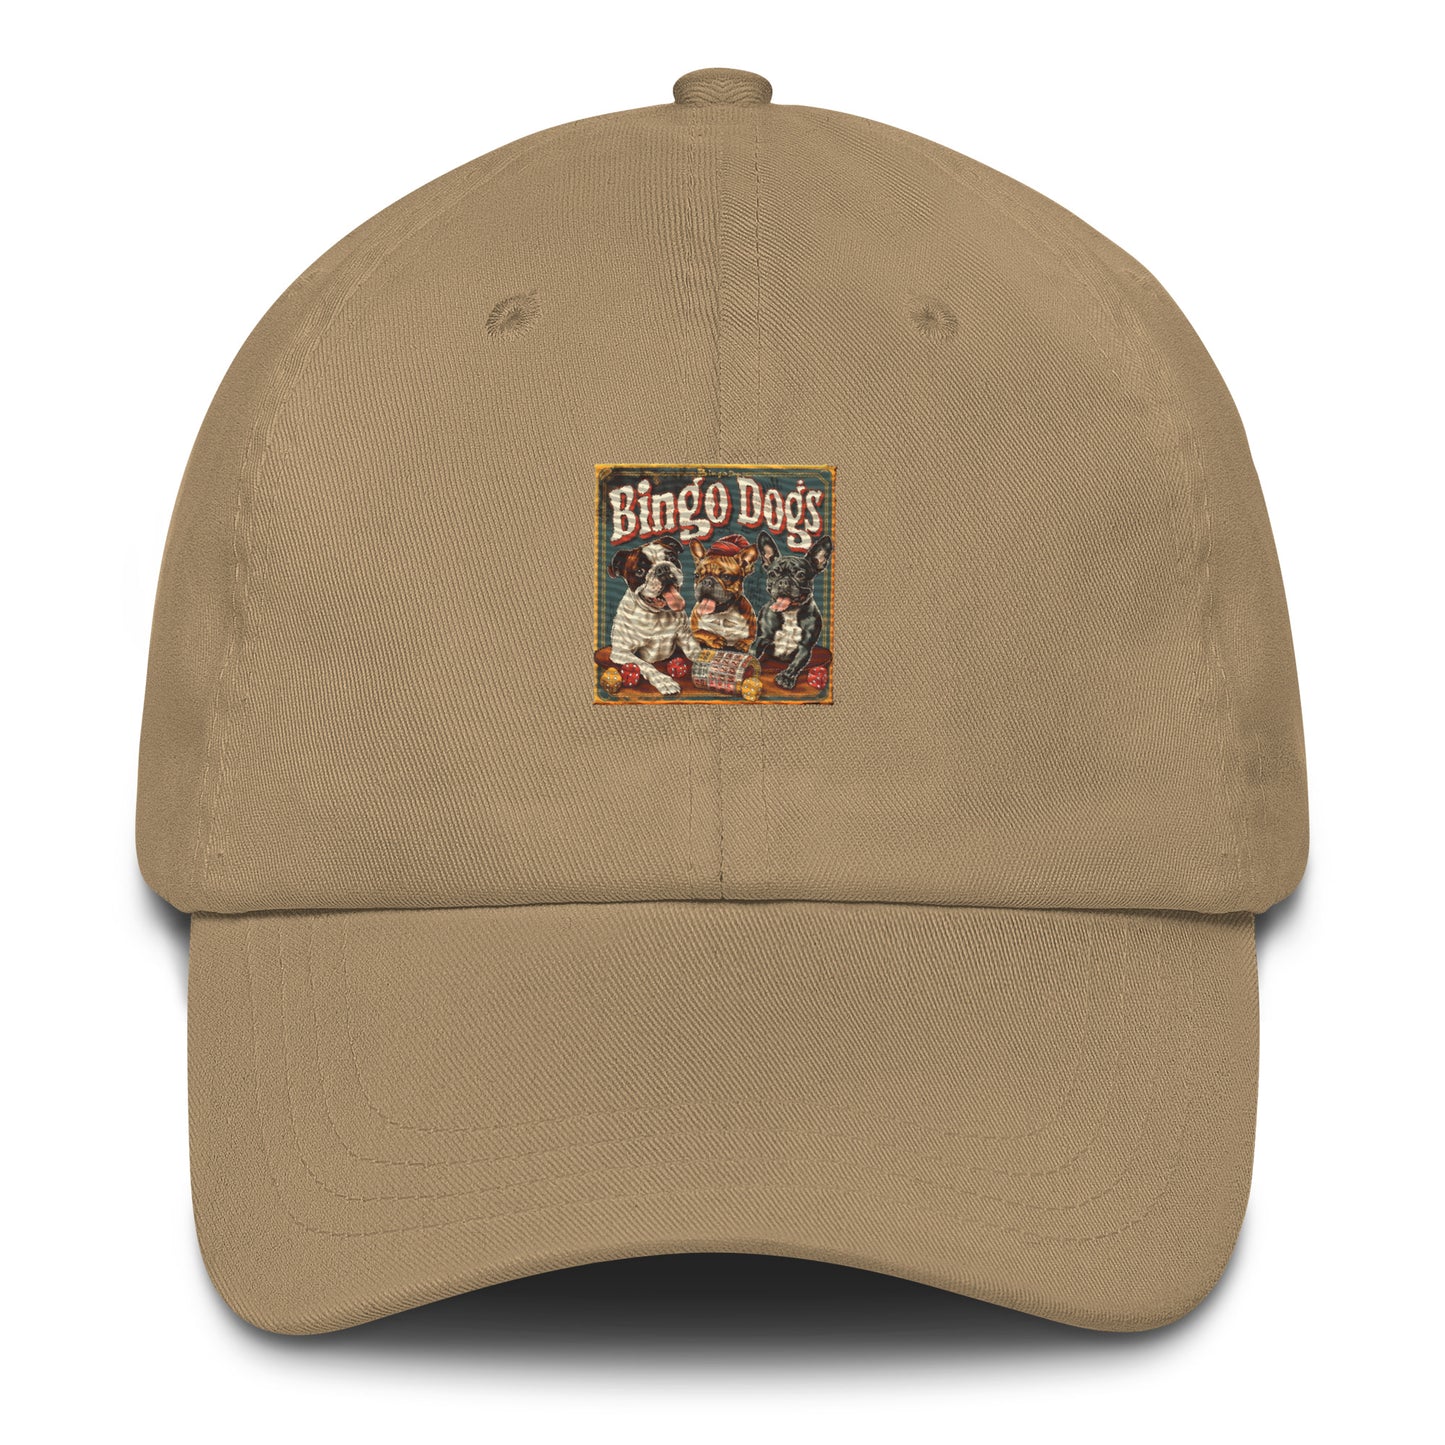 Welcome Bingo Dogs House, Enjoy the Play Dad Cap